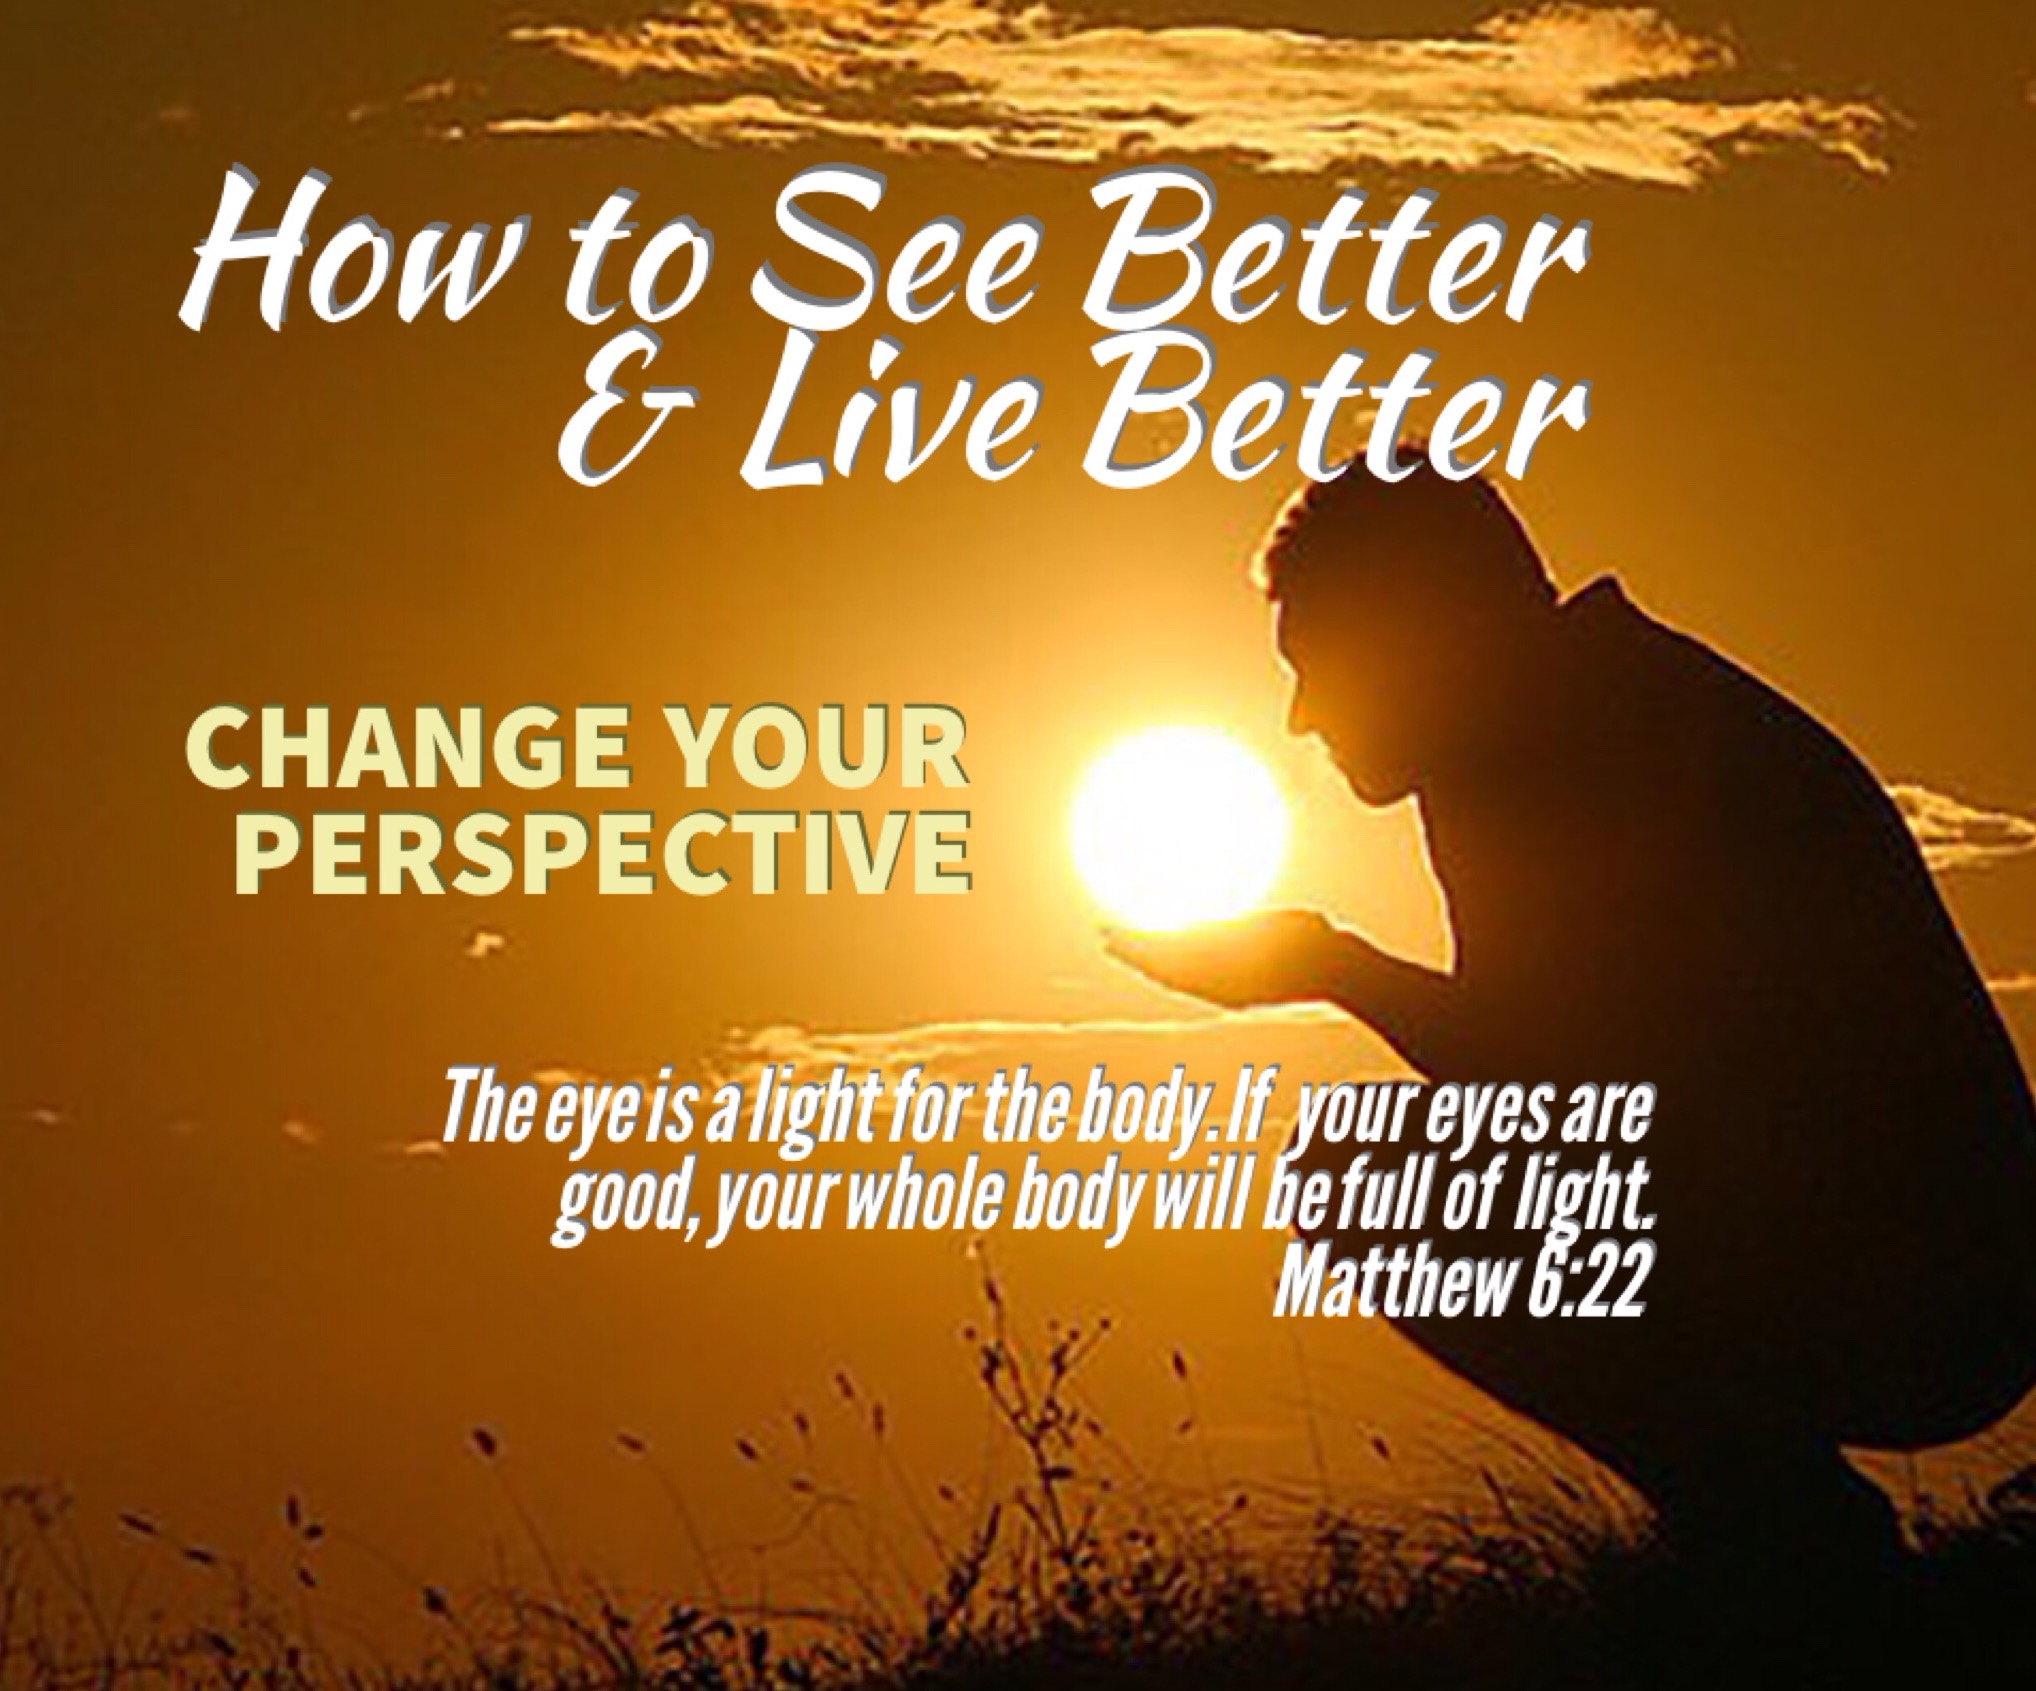 "How to See Better &amp; Live Better" - Pt. 2, Change Your Perspective